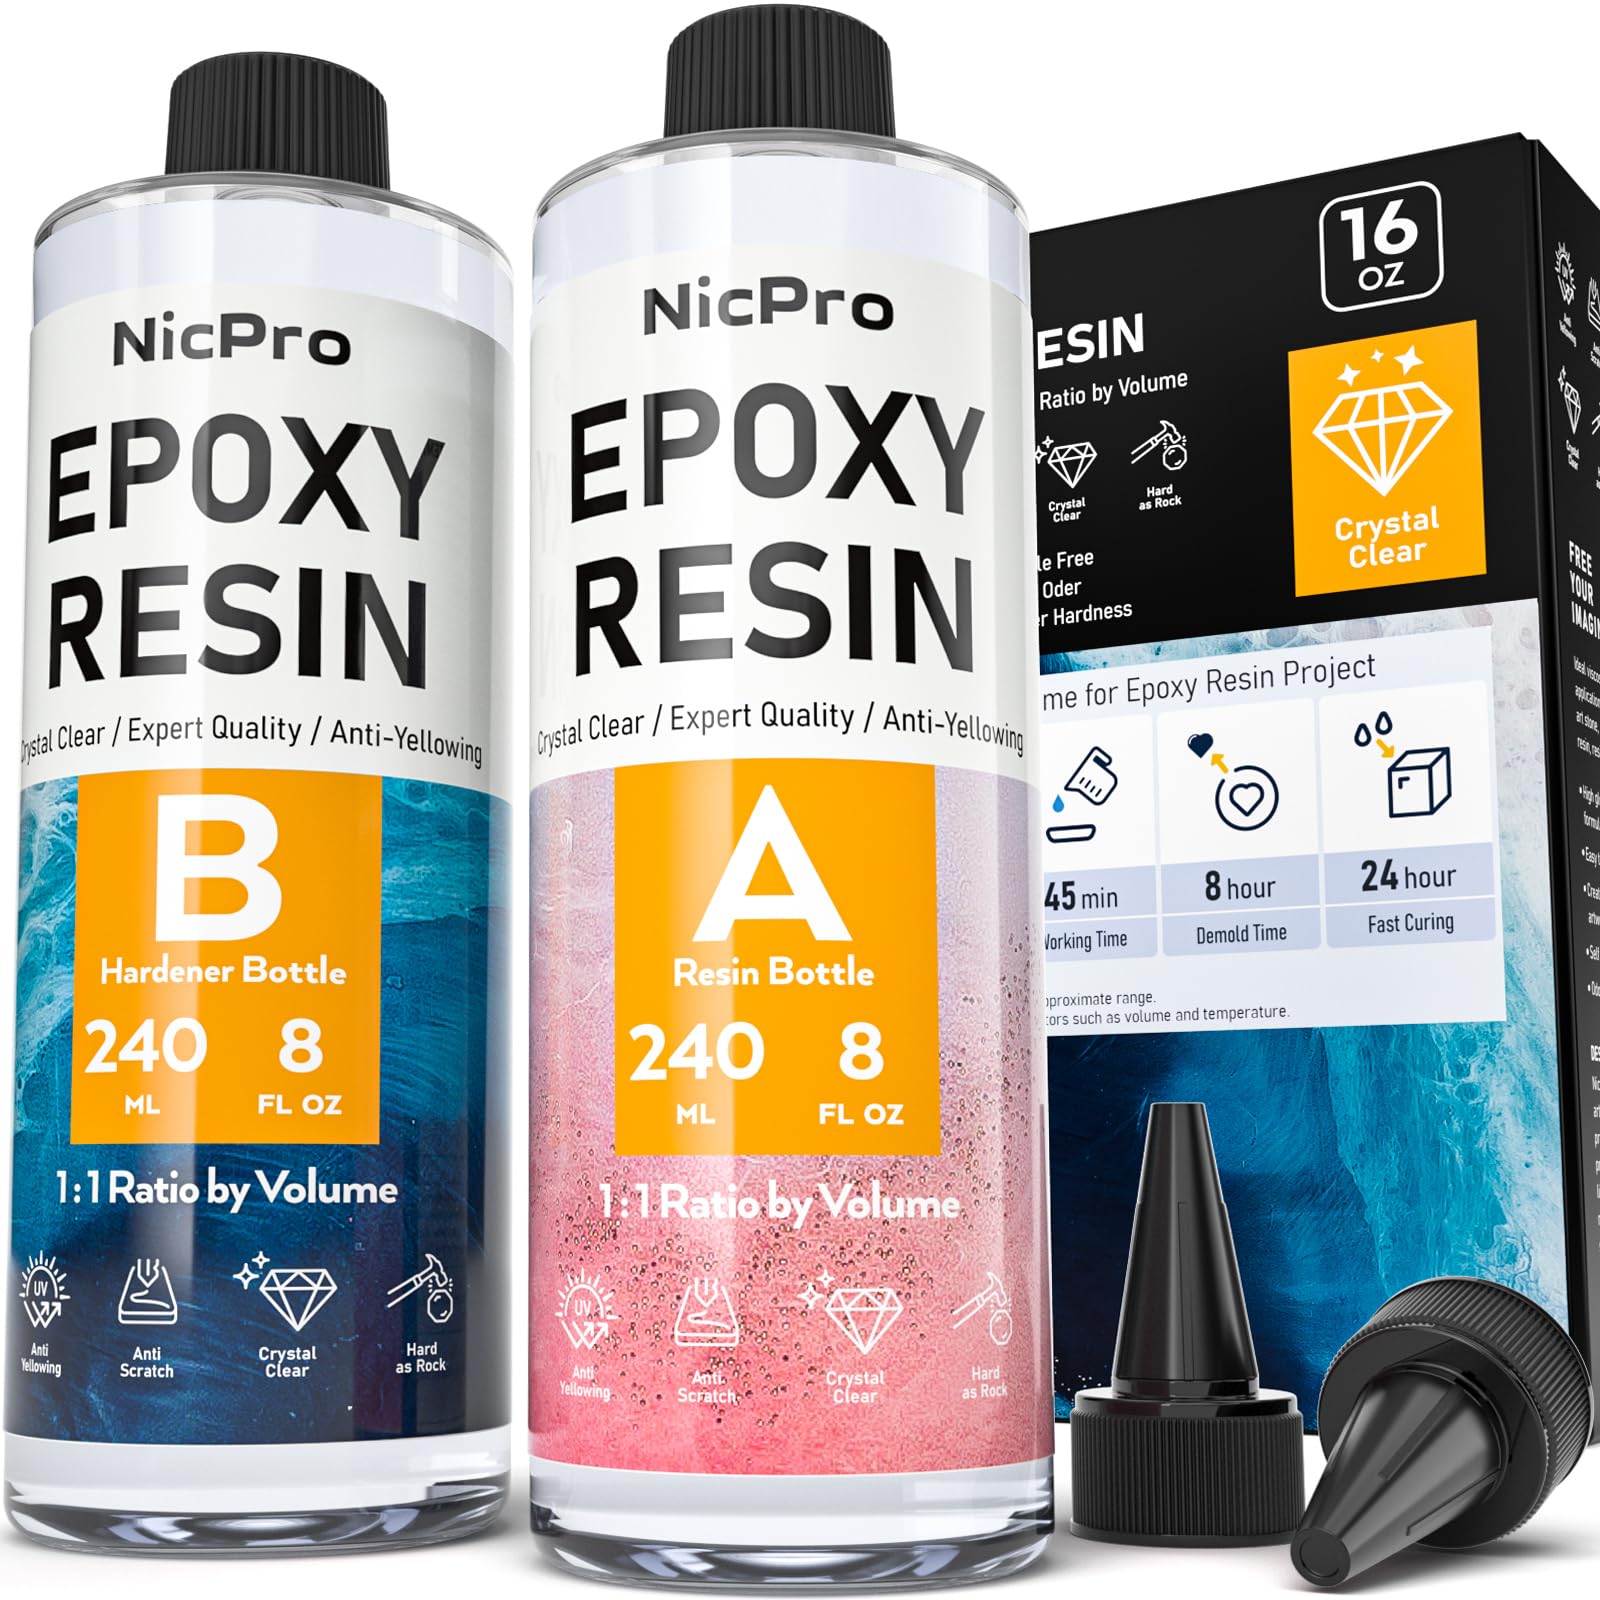 Nicpro 16 Ounce Crystal Clear Epoxy Resin Kit, Food Safe DIY Starter Epoxy Resin for Craft, Canvas Painting, Molds Pigment Jewelry Making, Resin Coating and Casting